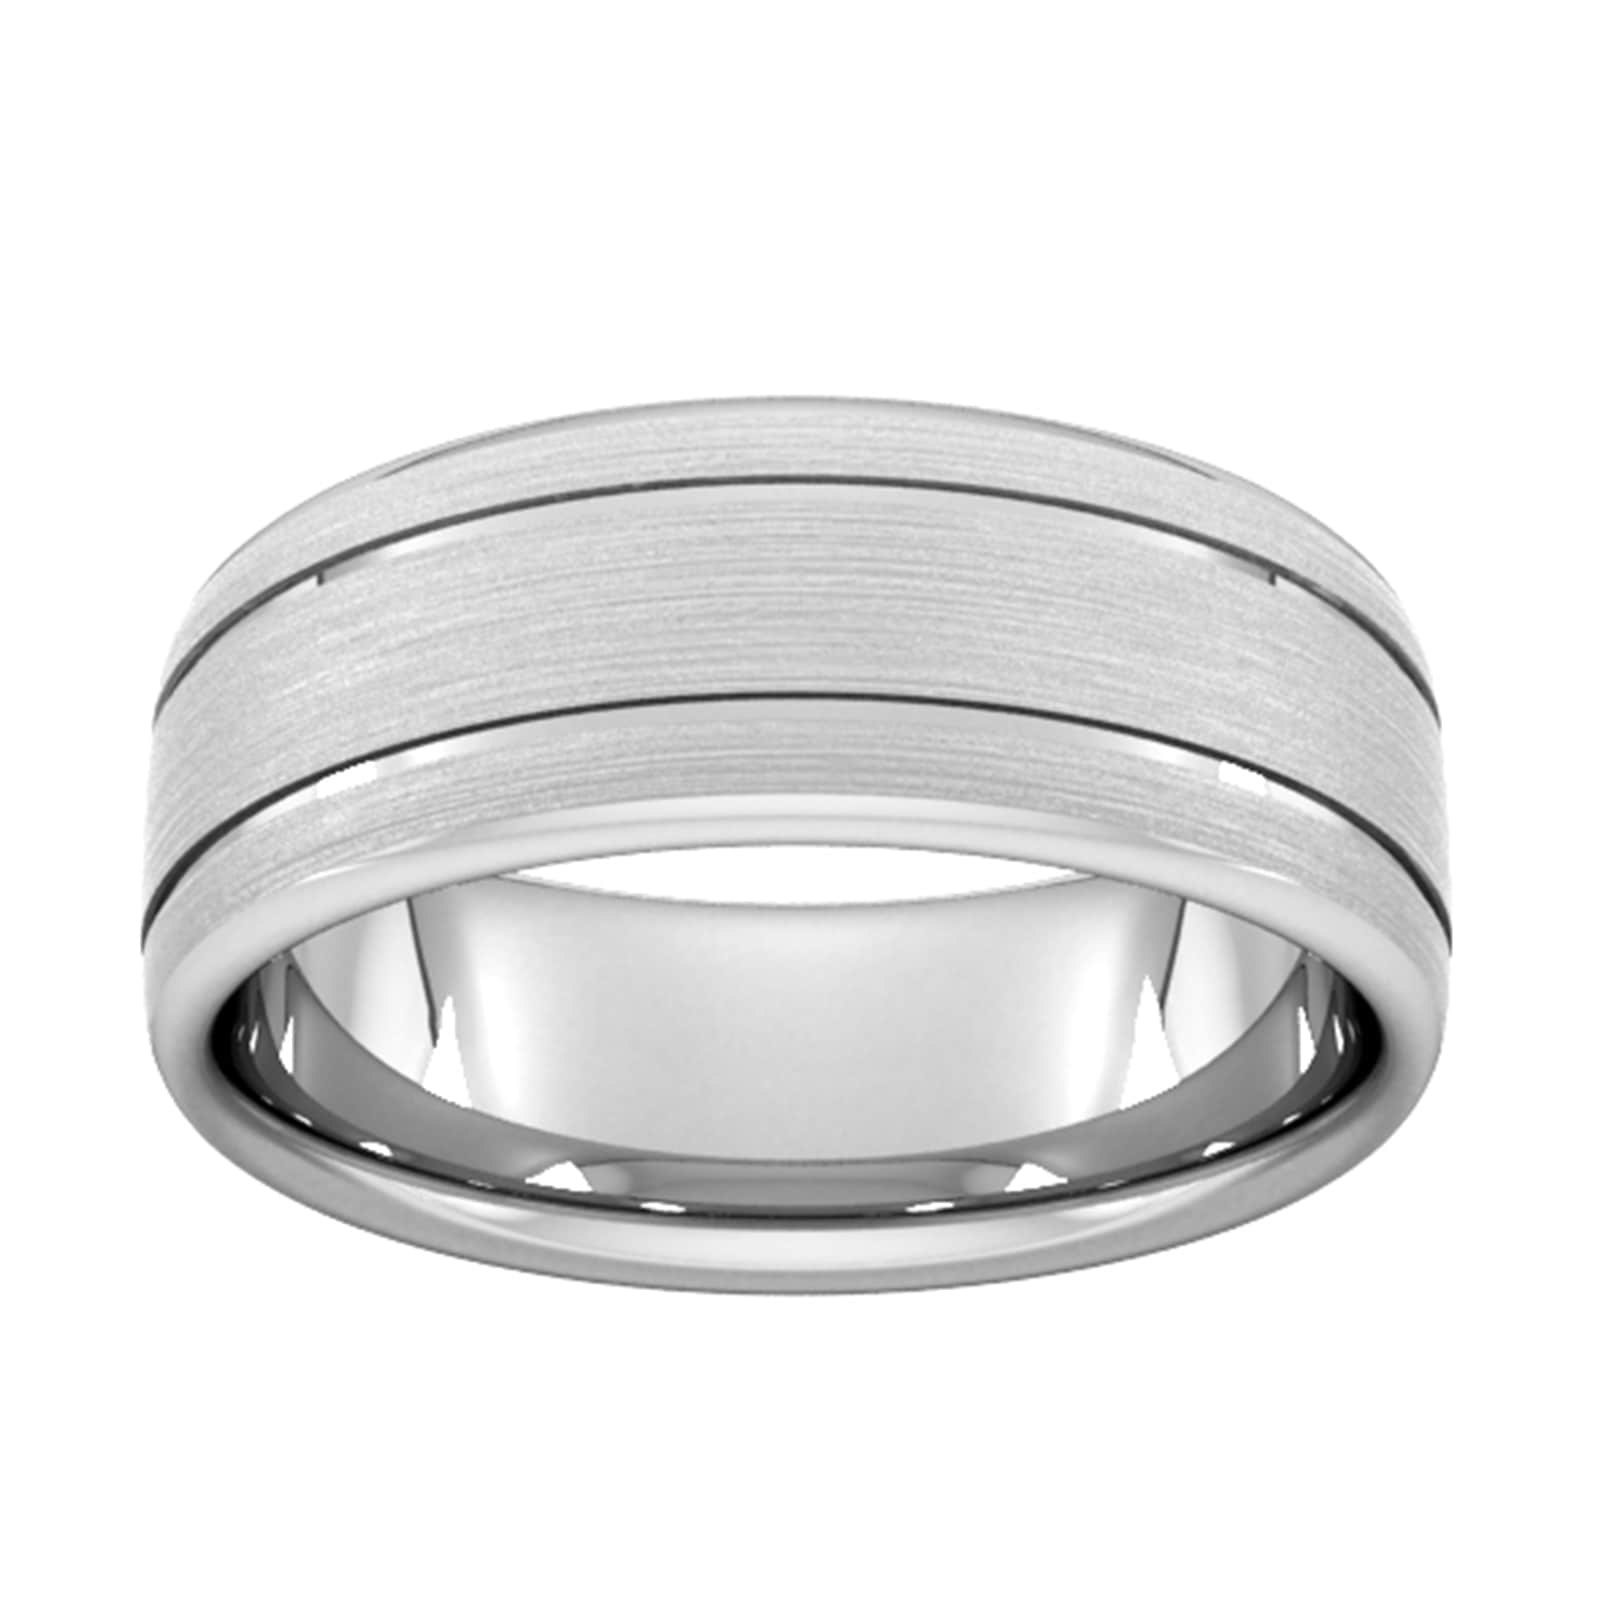 8mm Slight Court Heavy Matt Finish With Double Grooves Wedding Ring In 9 Carat White Gold - Ring Size I